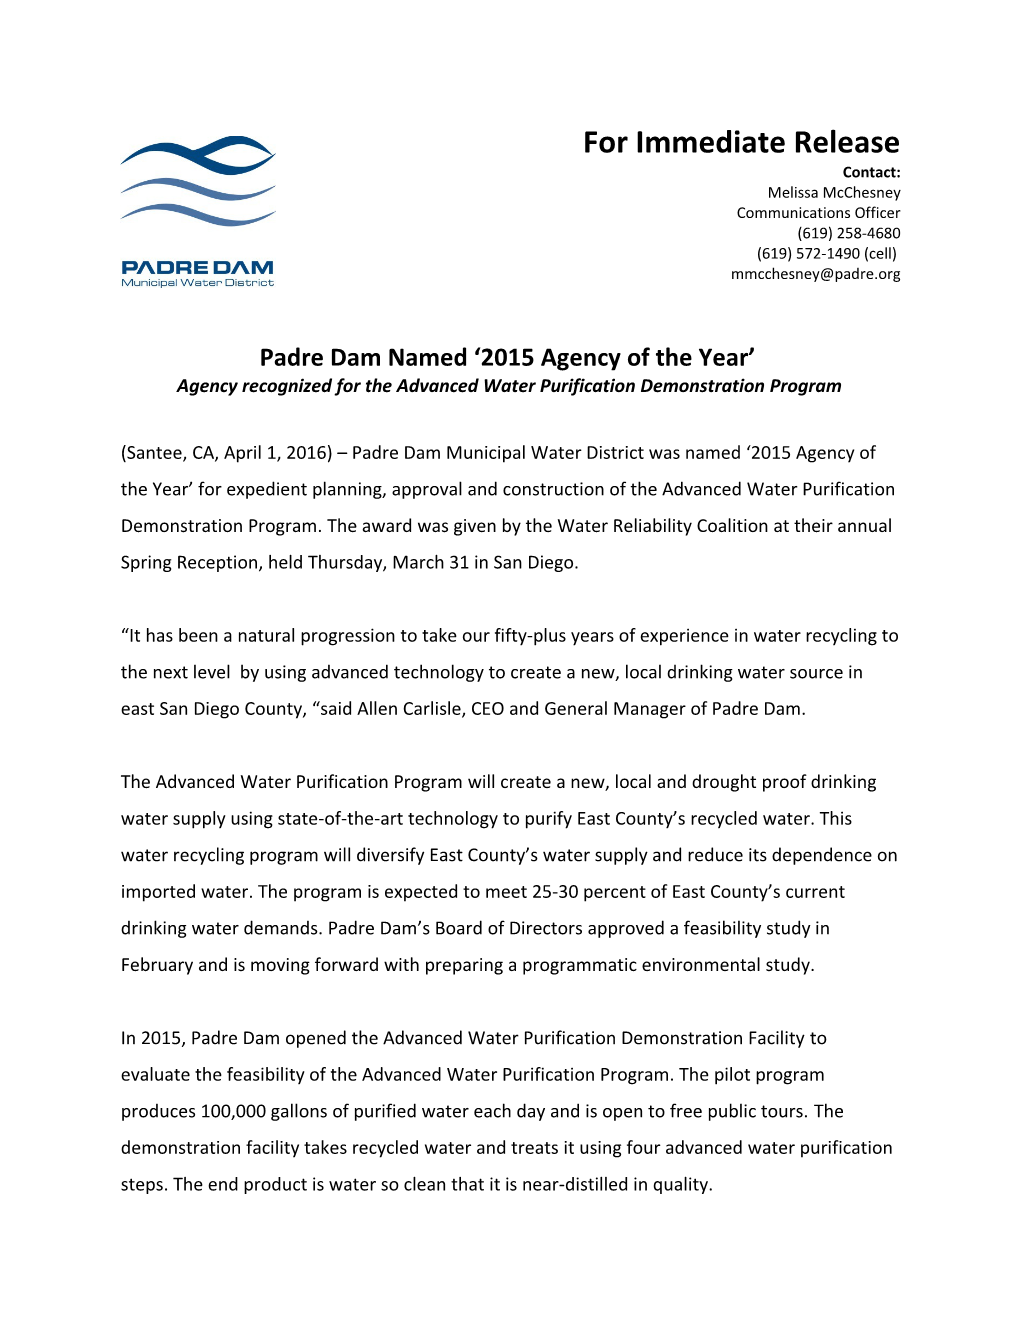 Padre Dam Named 2015 Agency of the Year